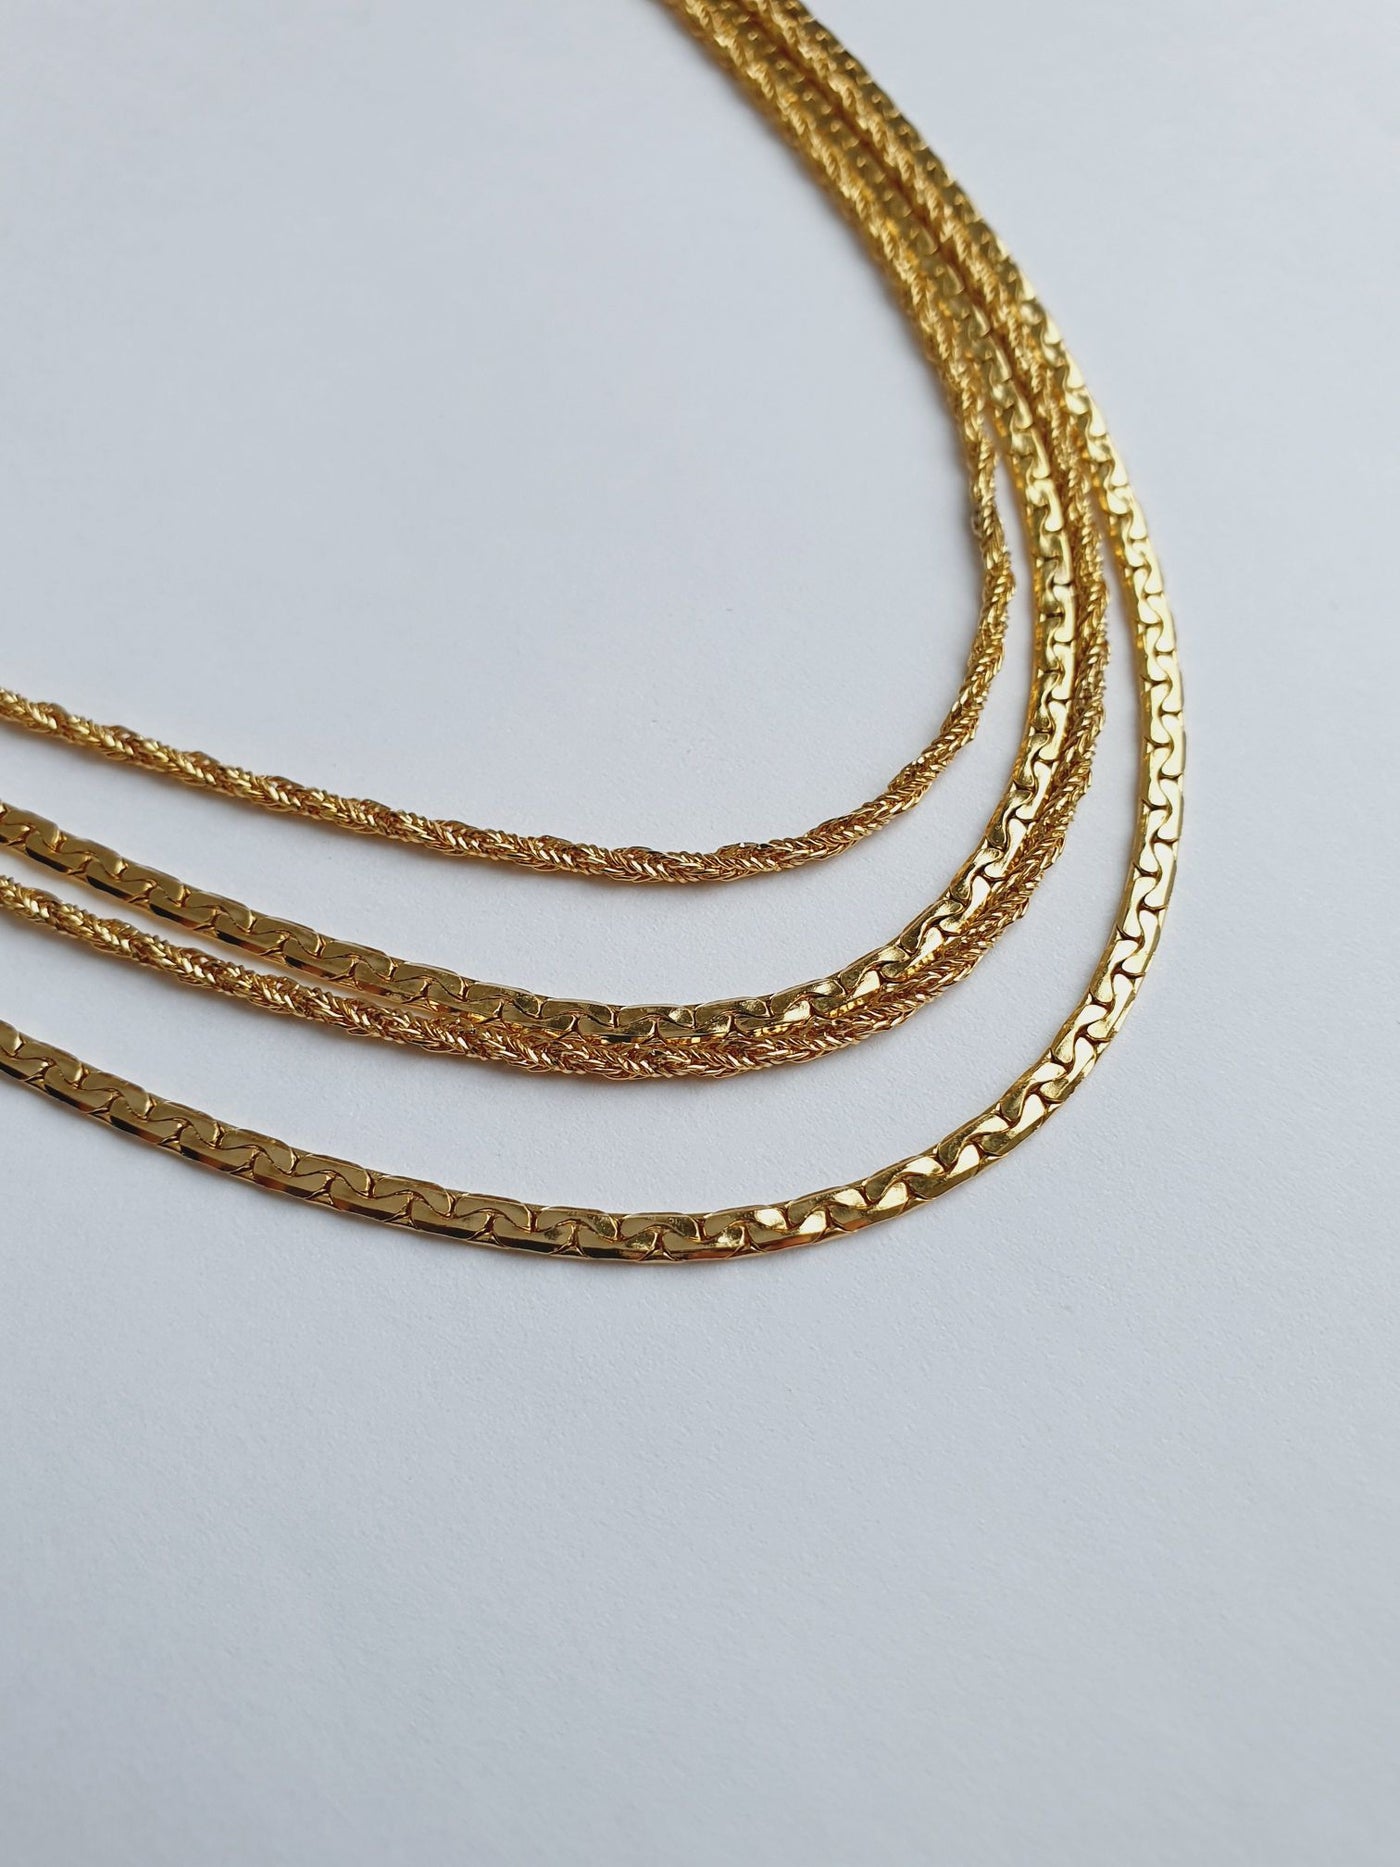 Vintage Gold Plated 4 Strand Chain Necklace